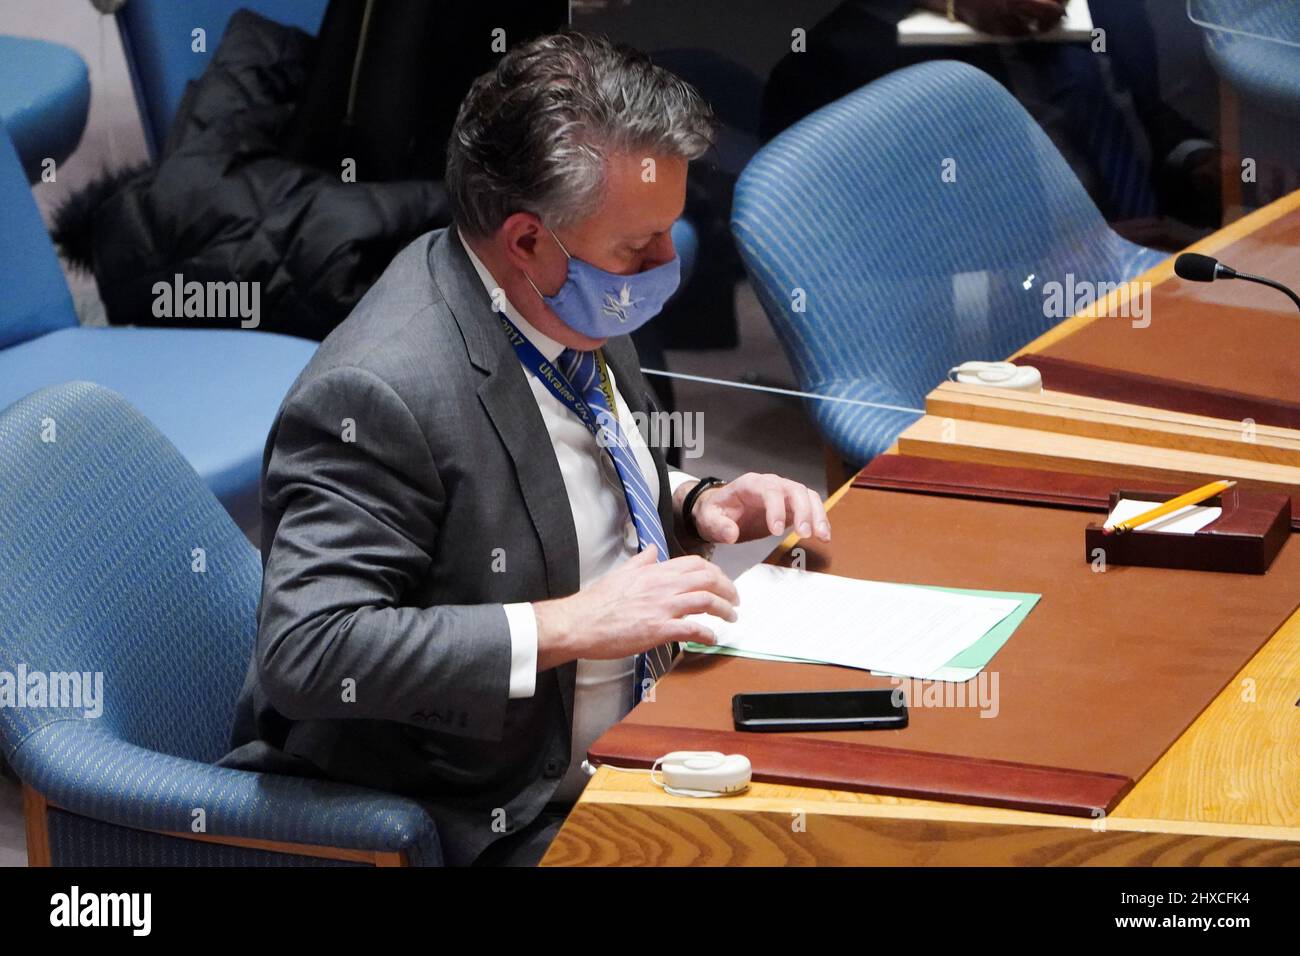 Ukrainian Ambassador to the United Nations Sergiy Kyslytsya attends the United Nations Security Council meeting on Threats to International Peace and Security, following Russia's invasion of Ukraine, in New York City, U.S. March 11, 2022. REUTERS/Carlo Allegri Stock Photo